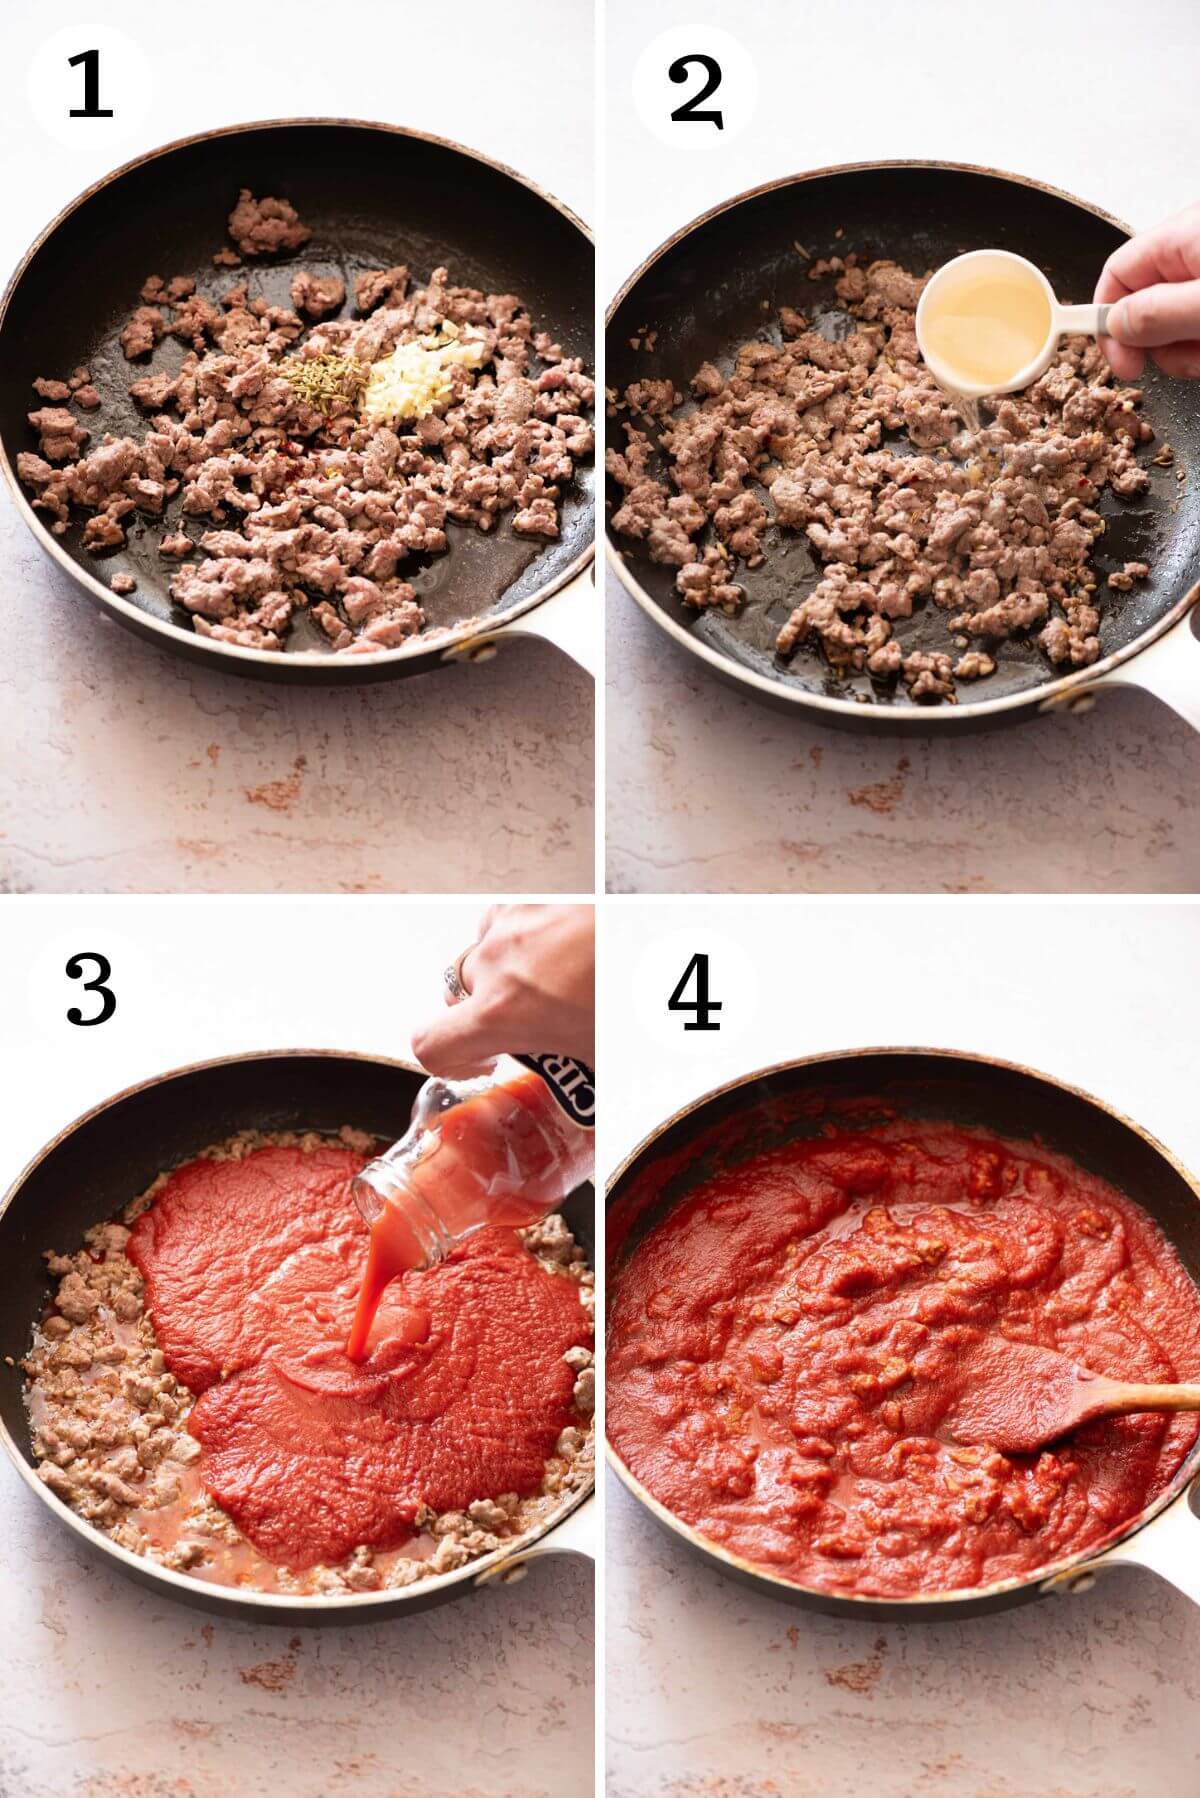 Four photos in a collage showing how to make Tuscan sausage pasta from scratch.